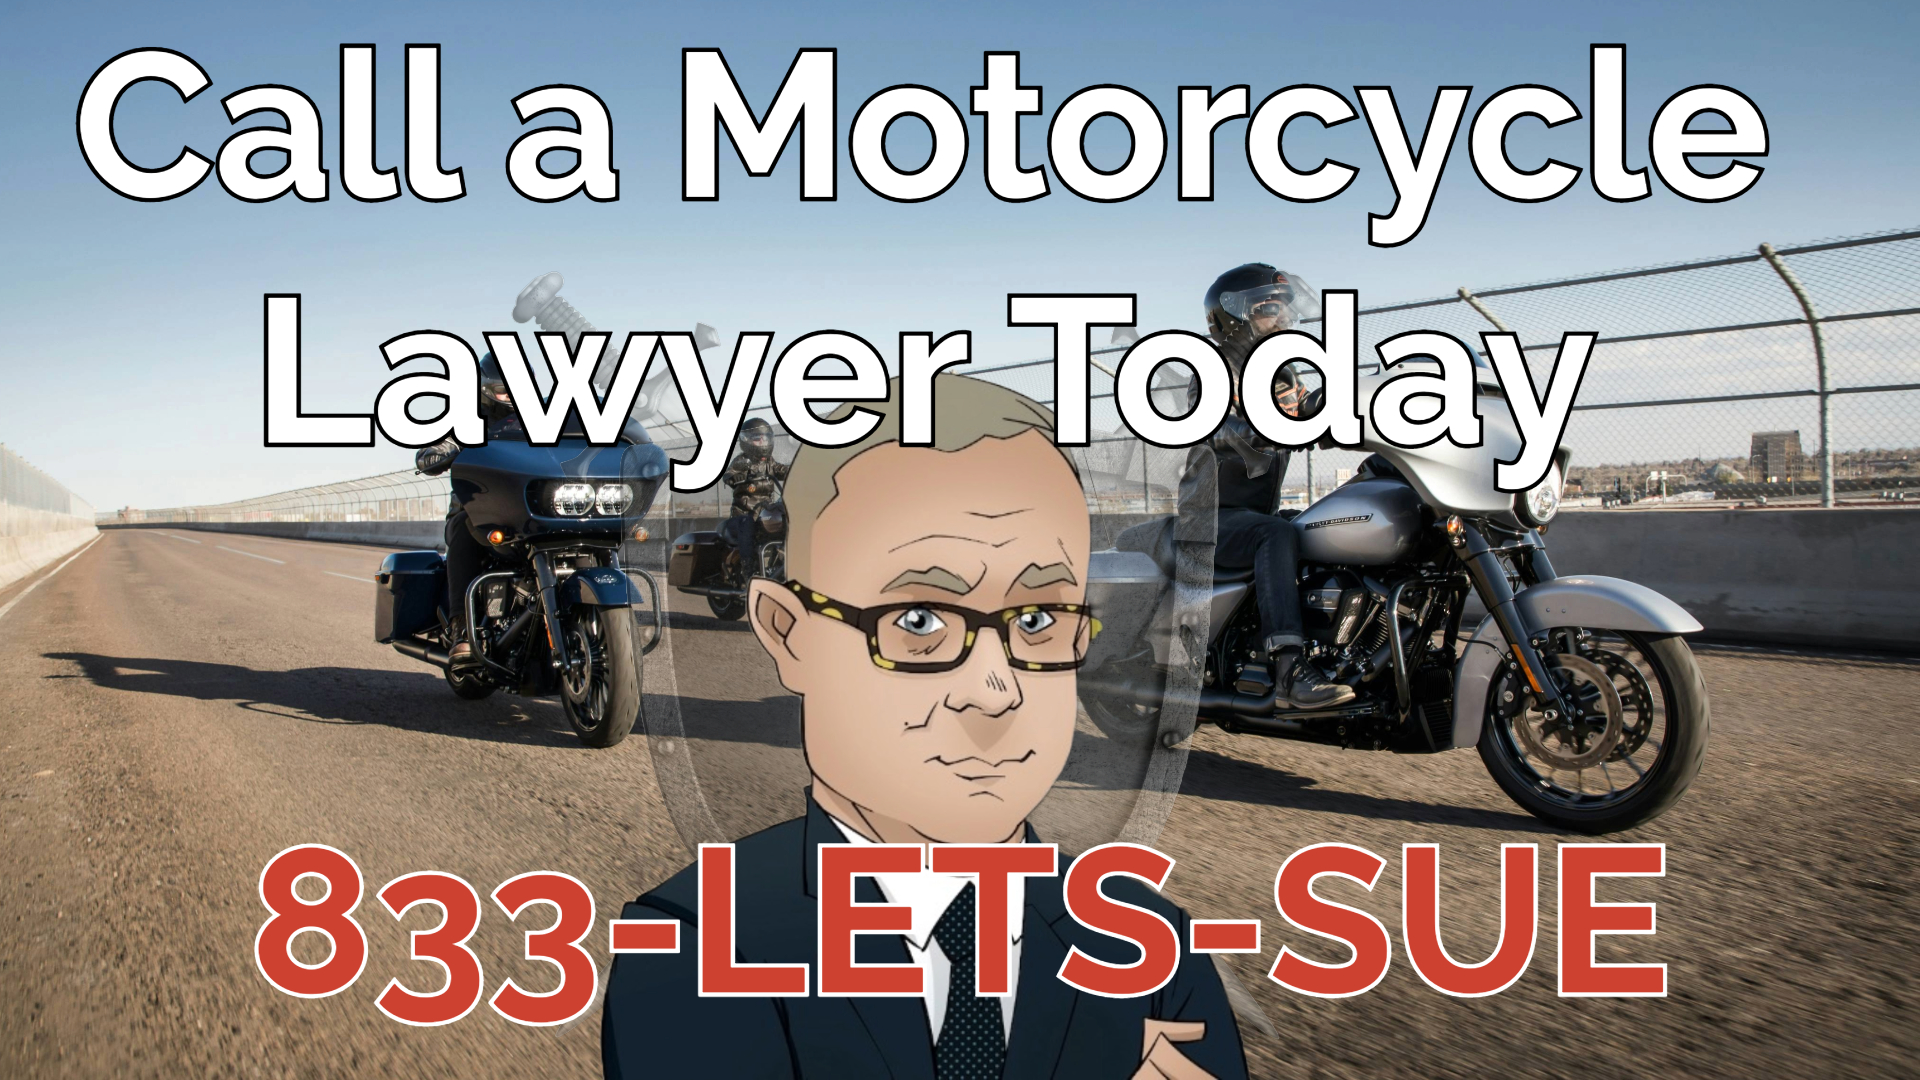 If you were in a motorcycle crash or want to learn more about your 2A rights, call (833) LETS-SUE today!